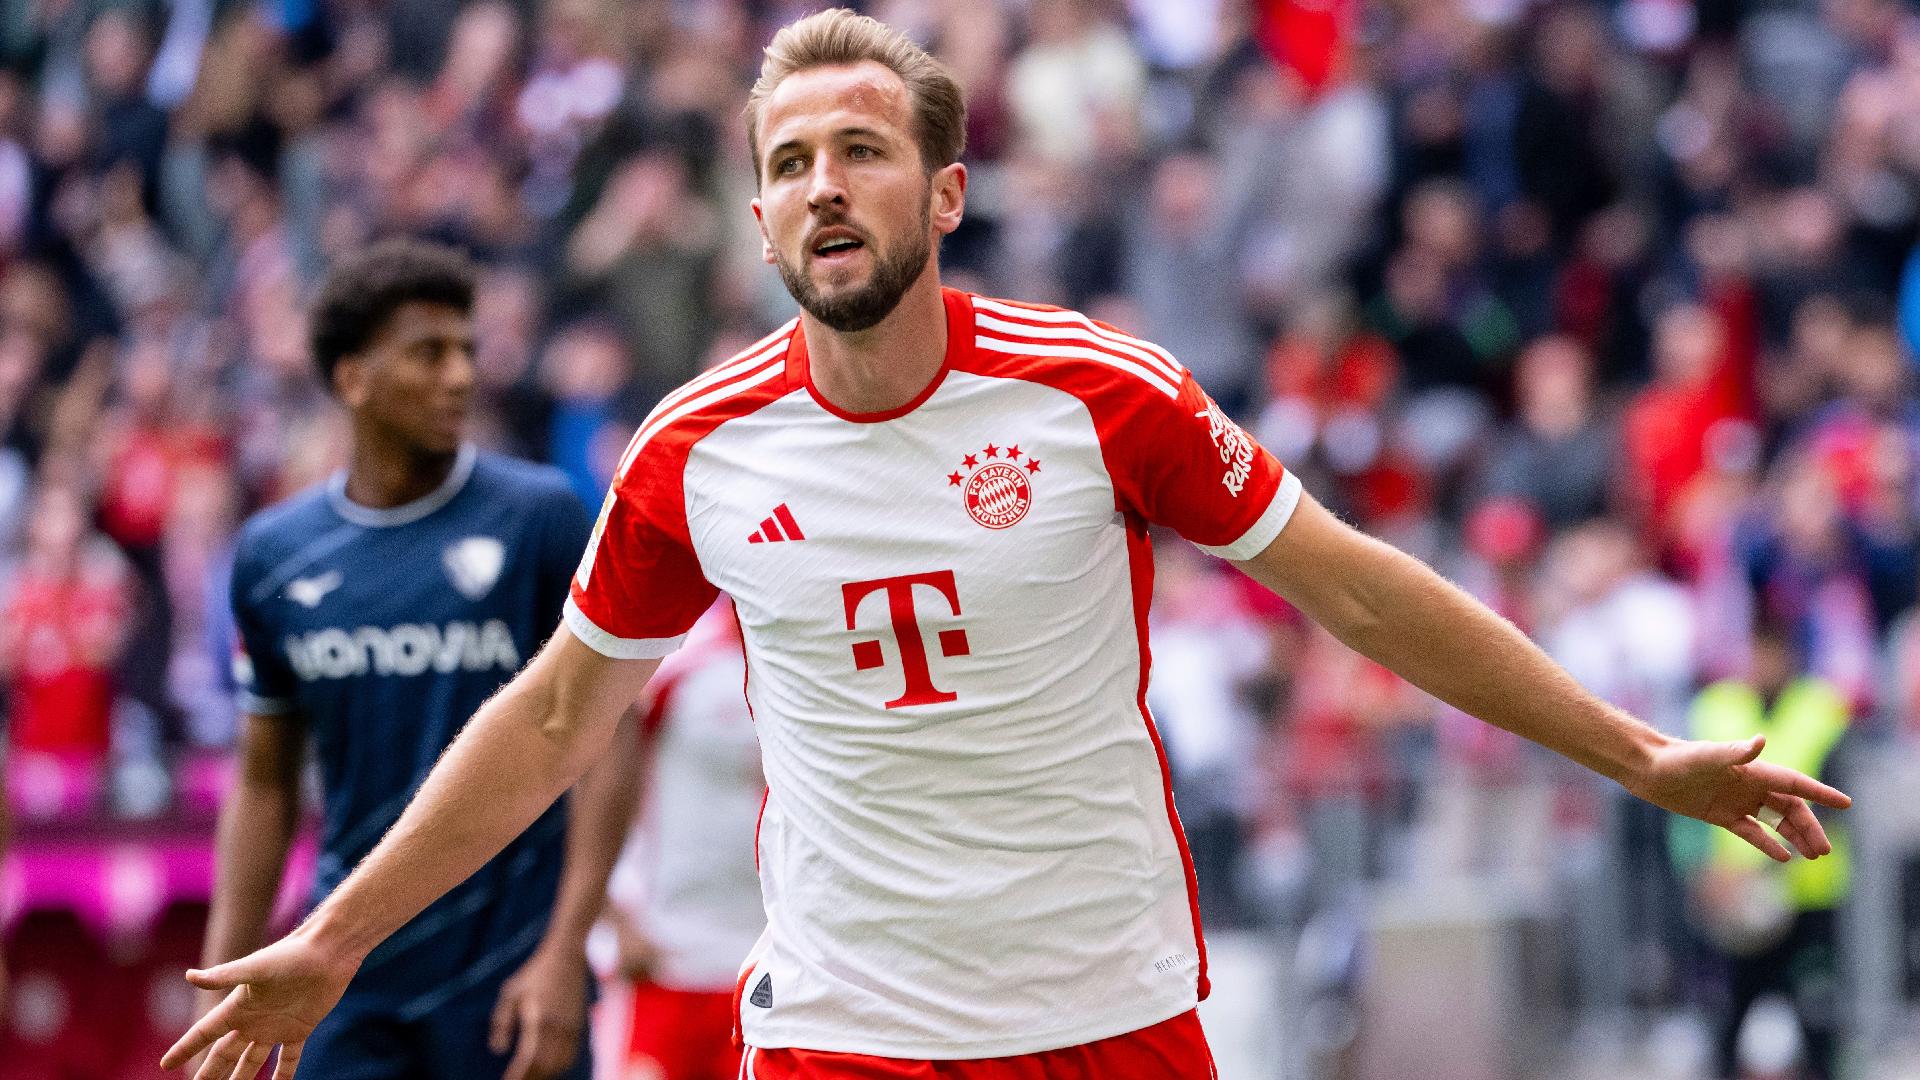 Harry Kane stars with hat-trick and two assists as Bayern Munich batter Bochum